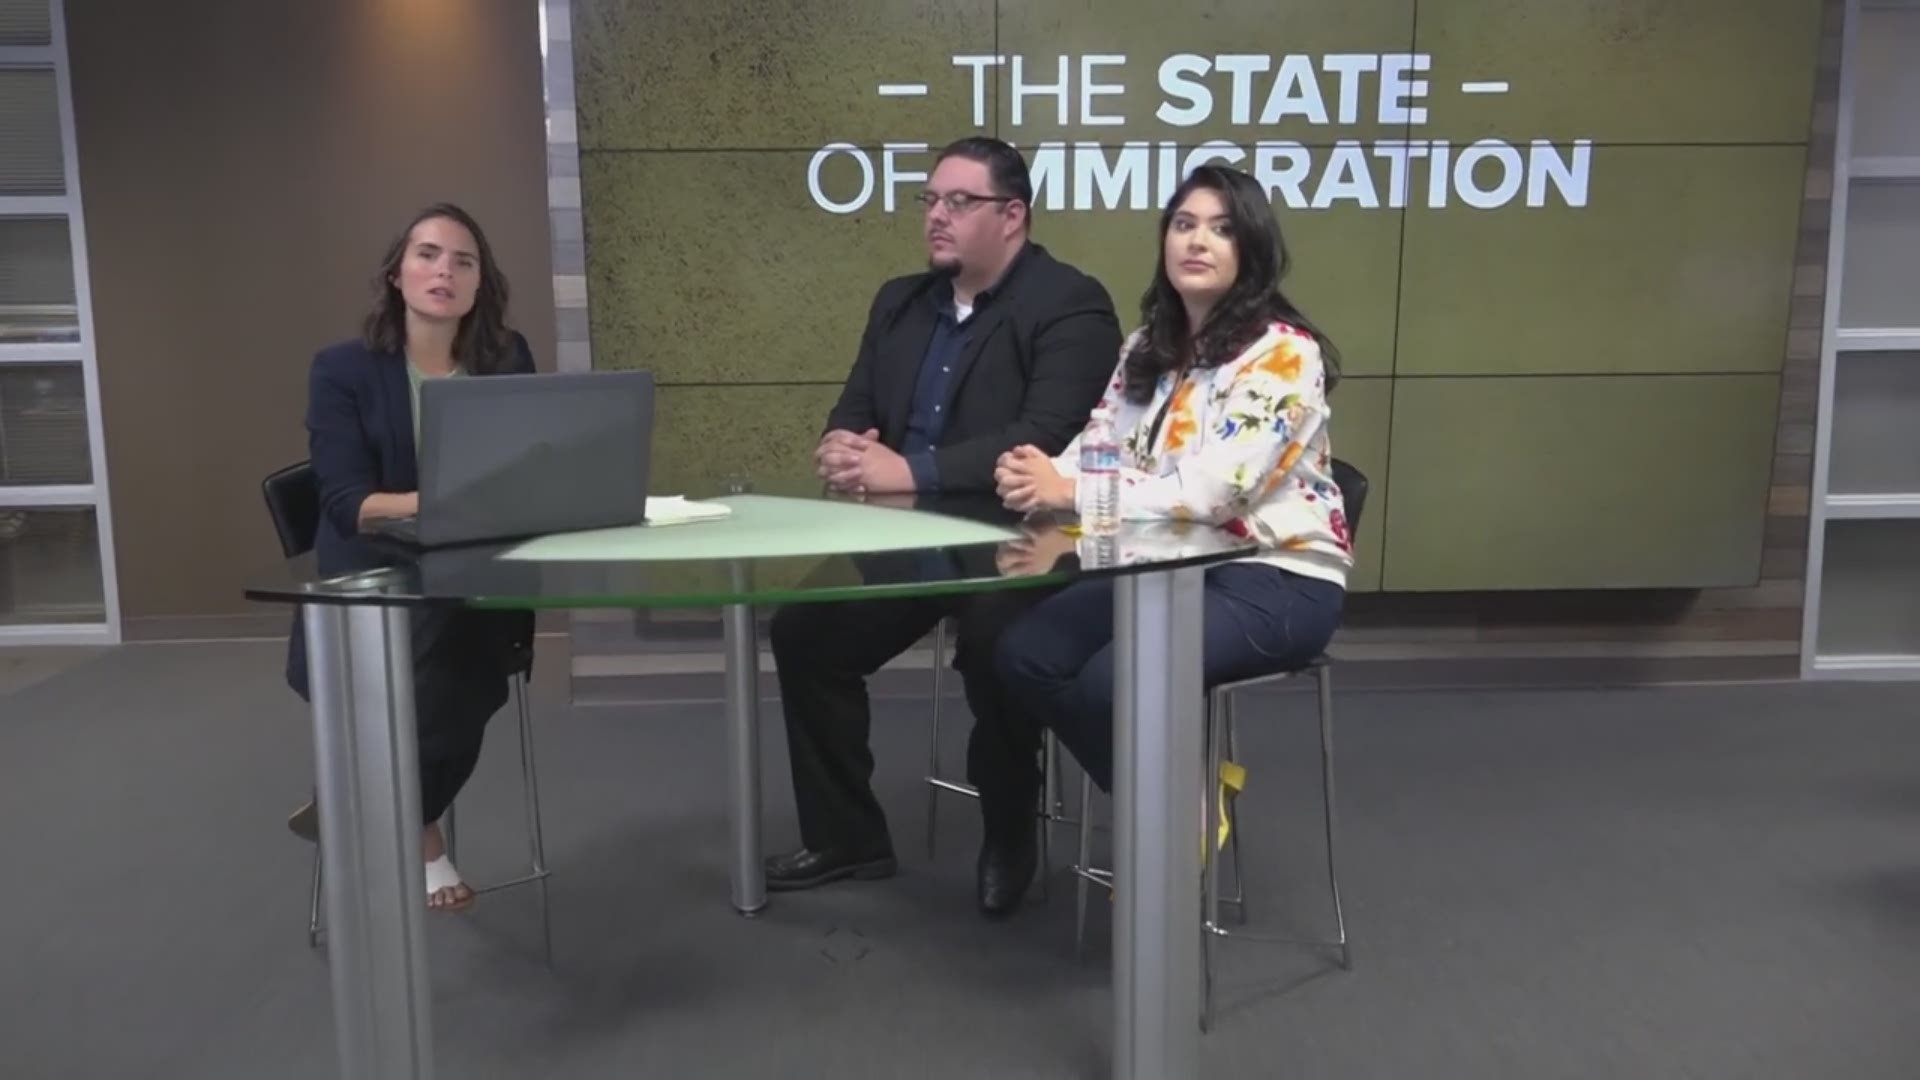 Reporter Lilia Luciano is hosting a discussion with guests from Sacramento A.C.T (Sacramento Area Congregations Together) and P.I.C.O California to talk the state of immigration.